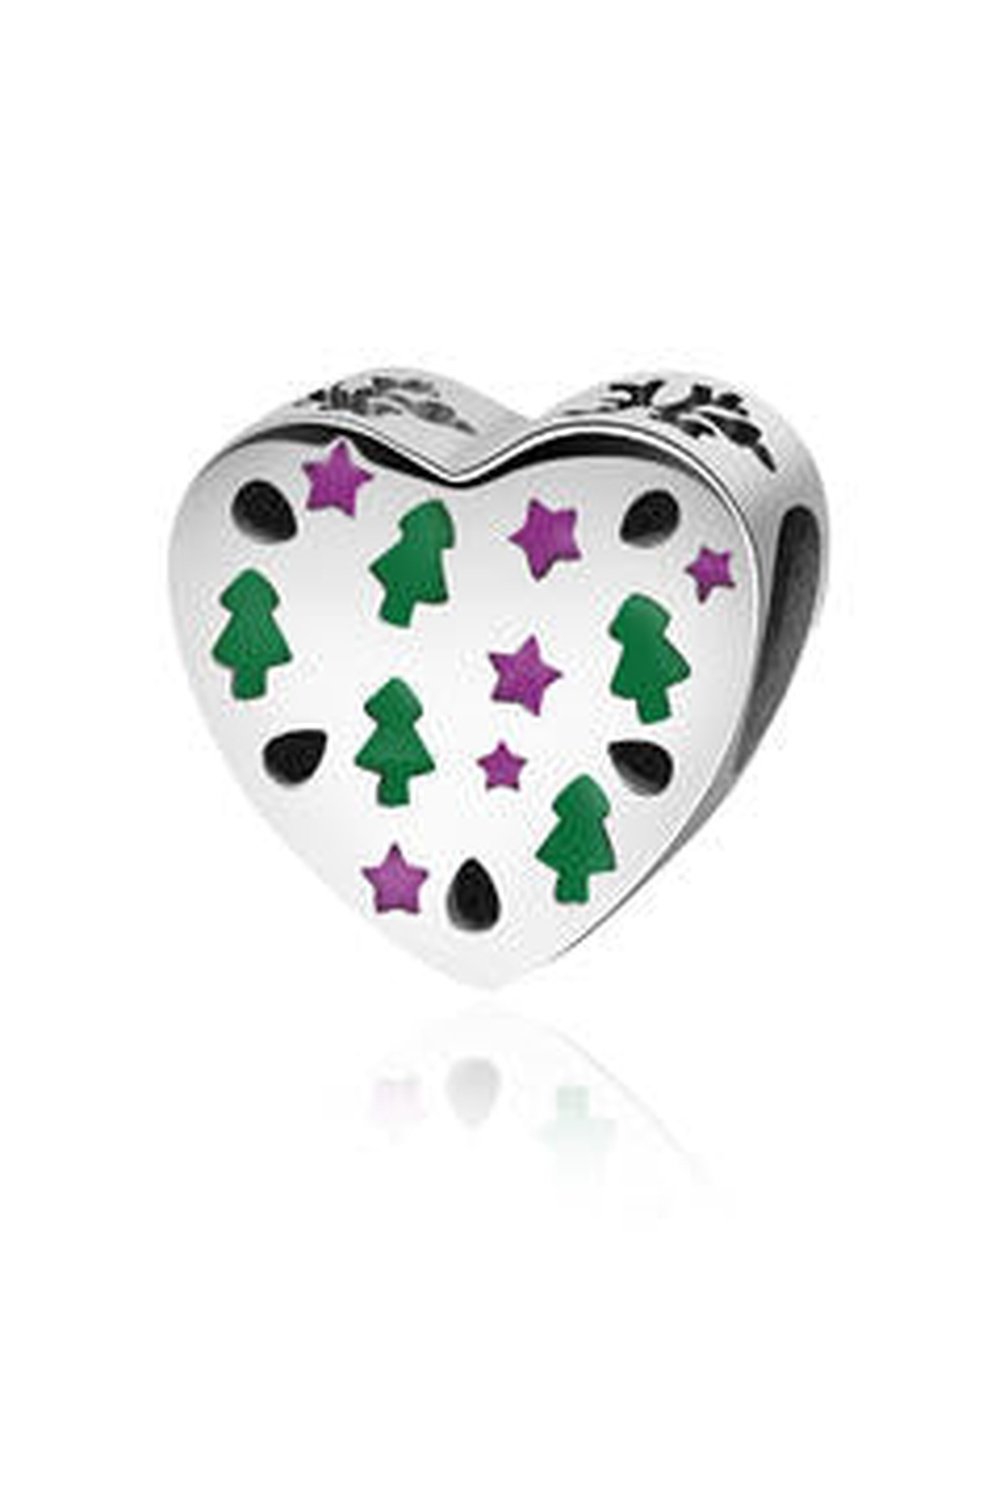 One Piece 925 Sterling Silver Heart Bead Charm - Bracelets - FITGGINS